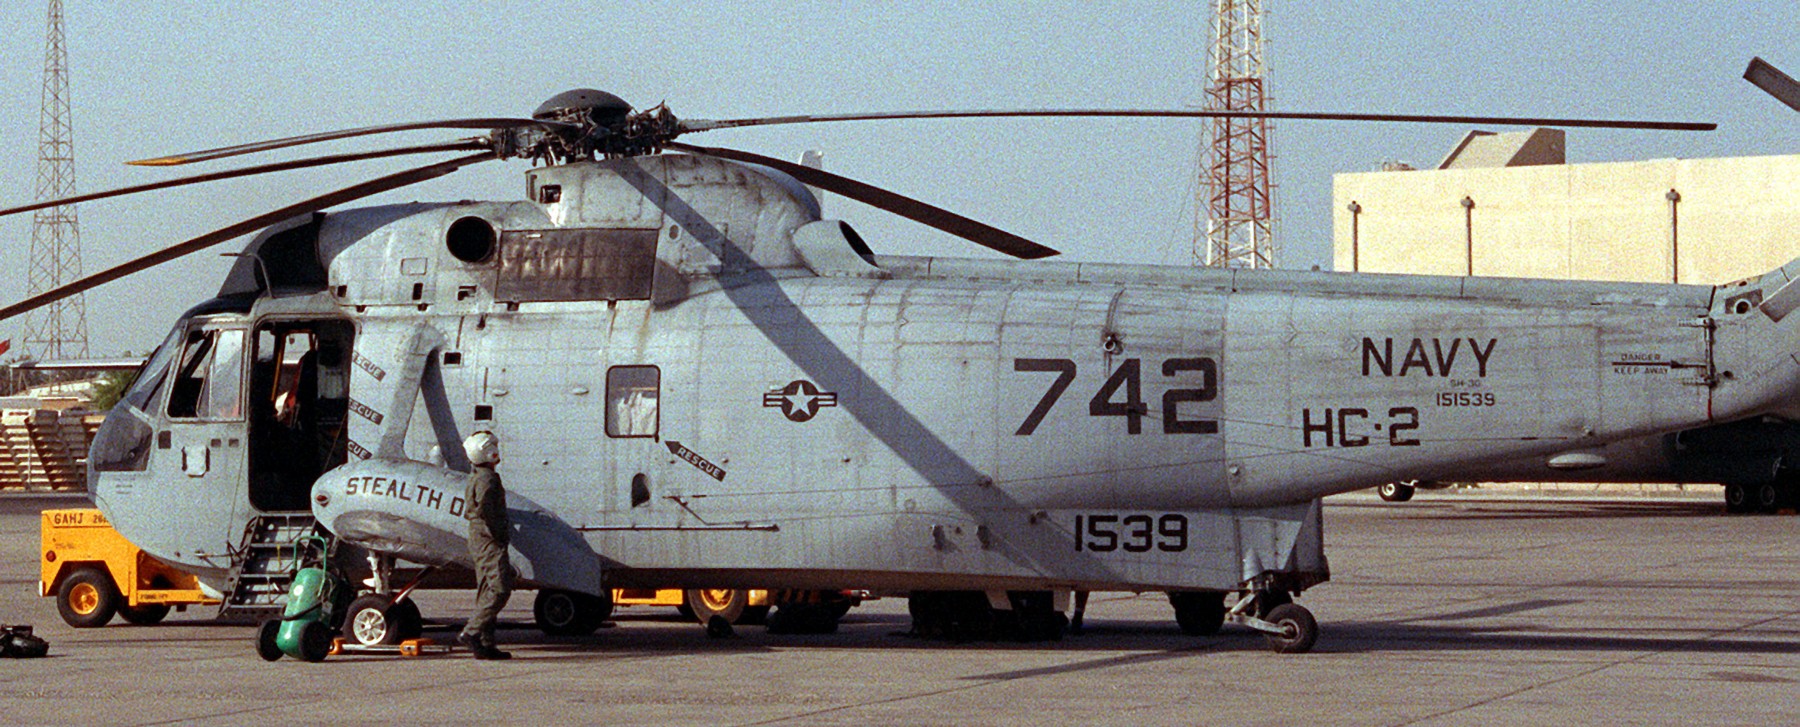 hc-2 fleet angels helicopter combat support squadron us navy sh-3g sea king 23 desert shield